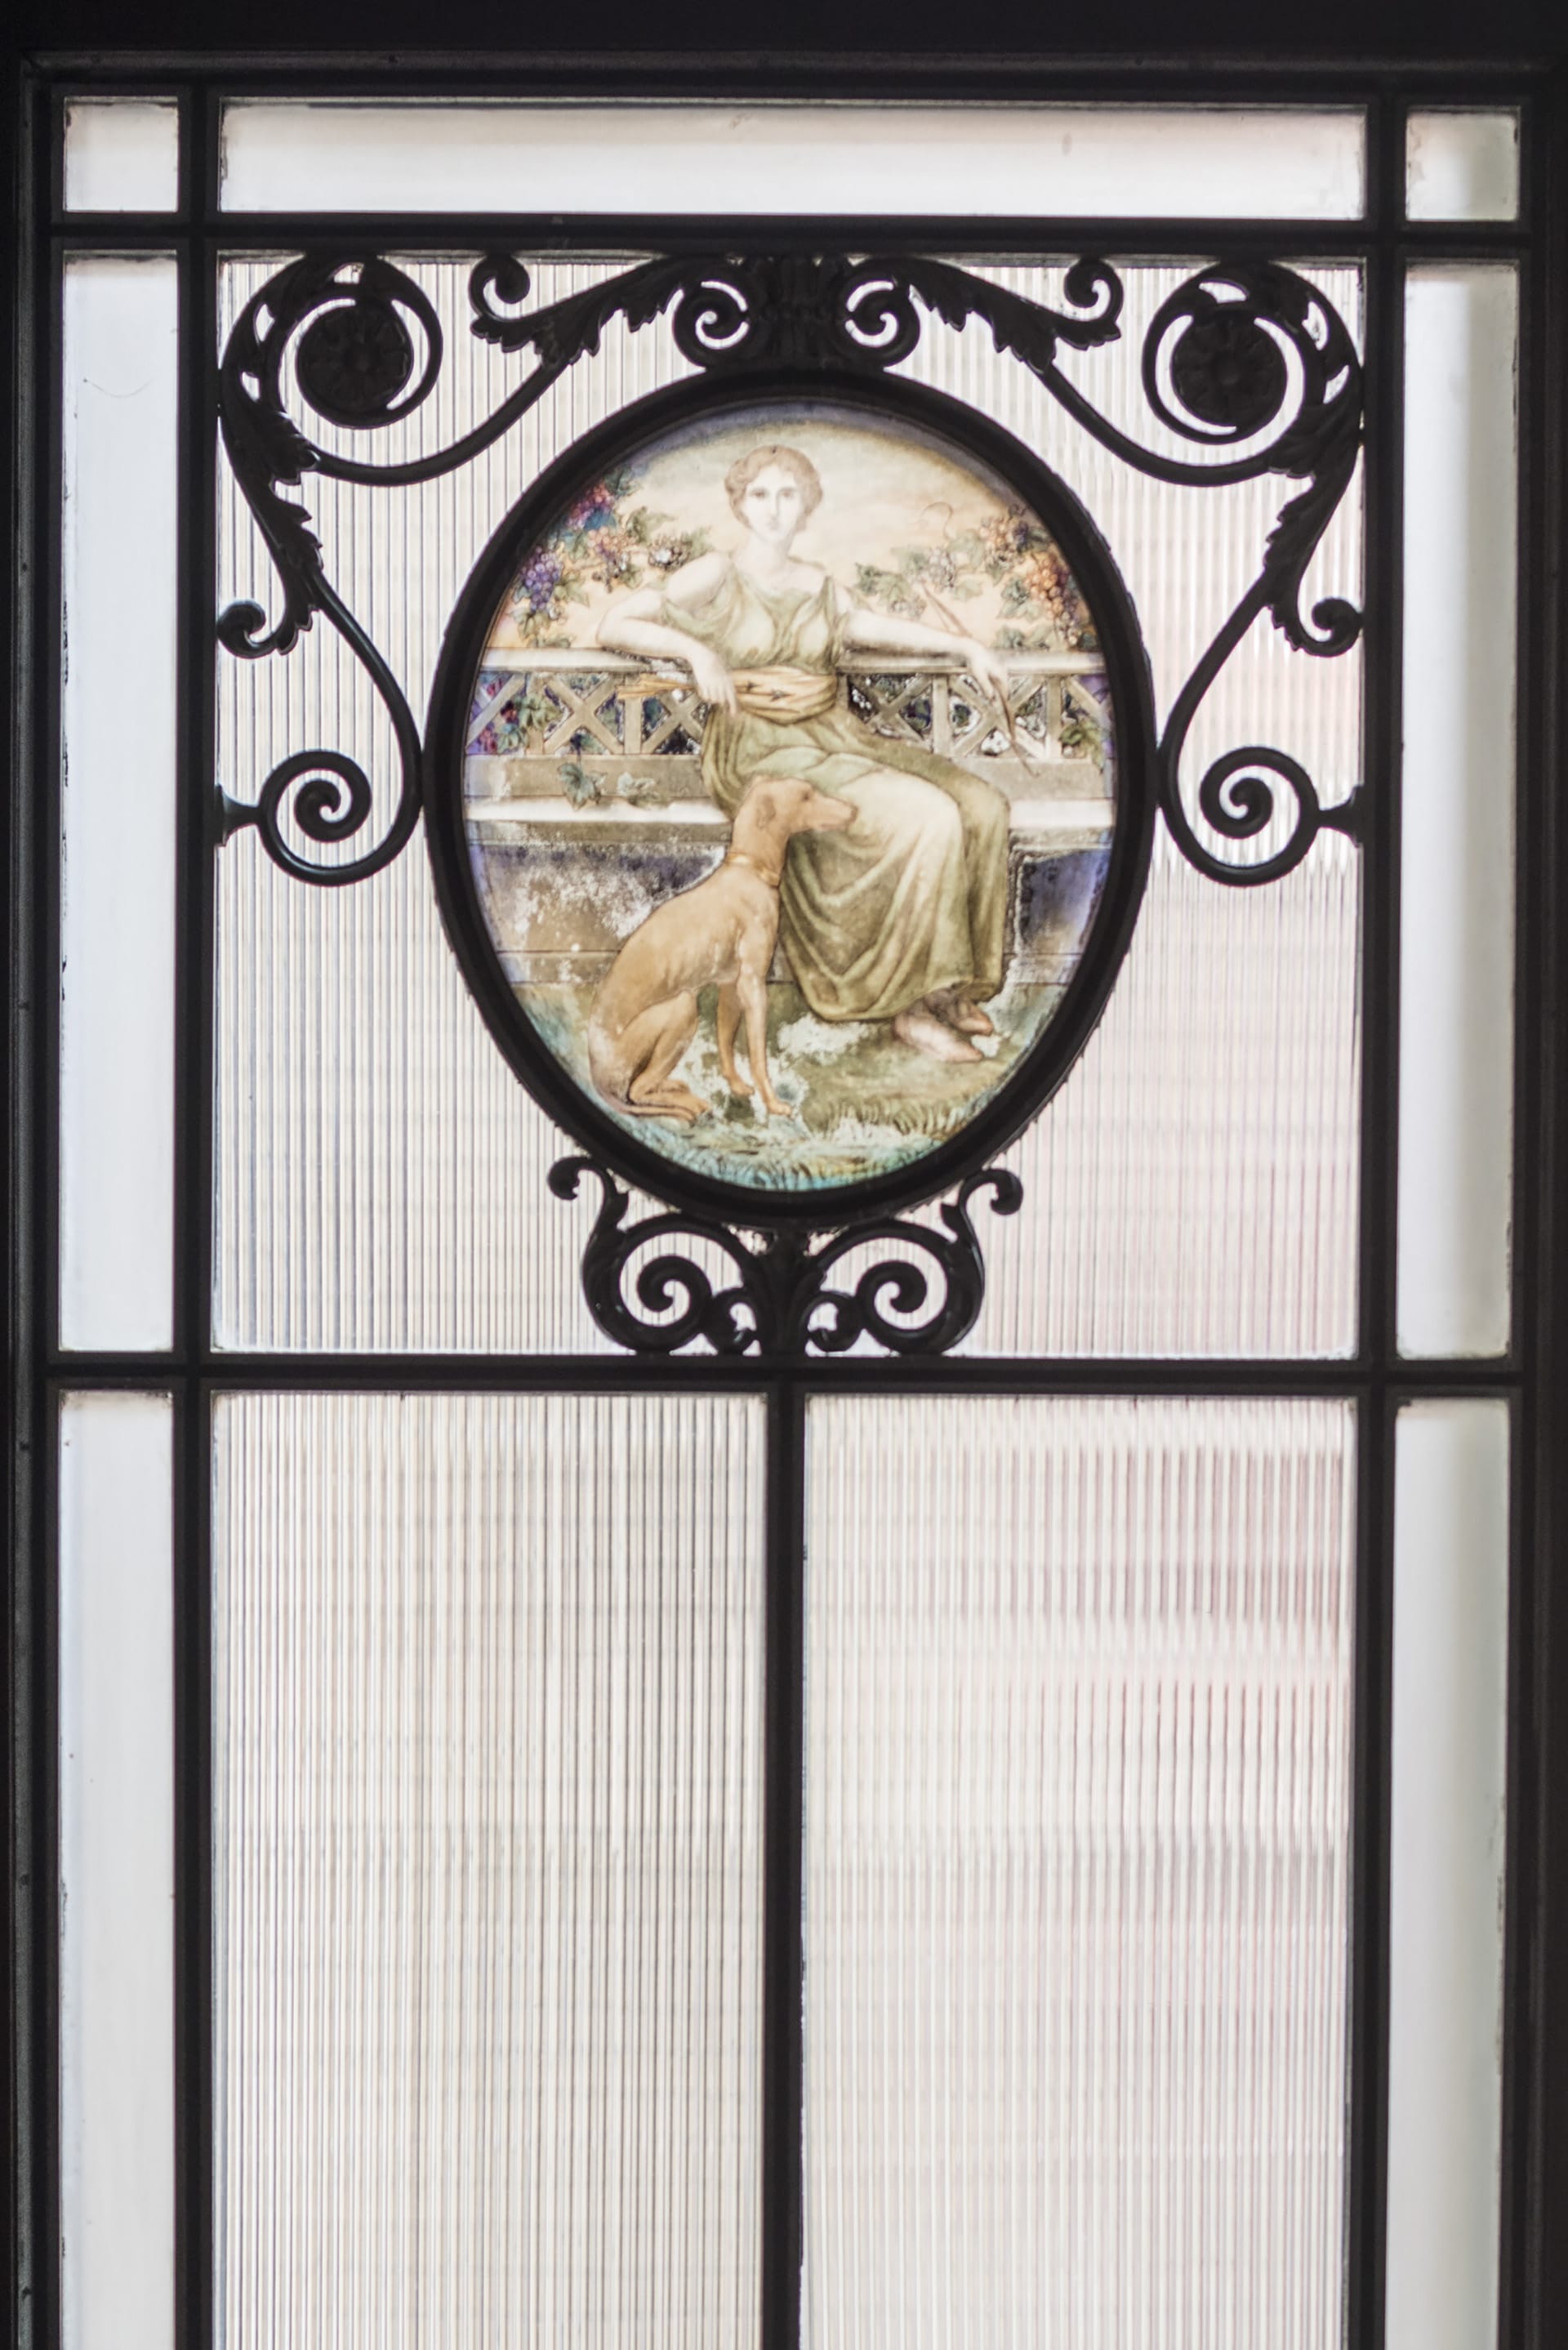 Detail shot of leaded glass windows with a detailed image of a woman and dog